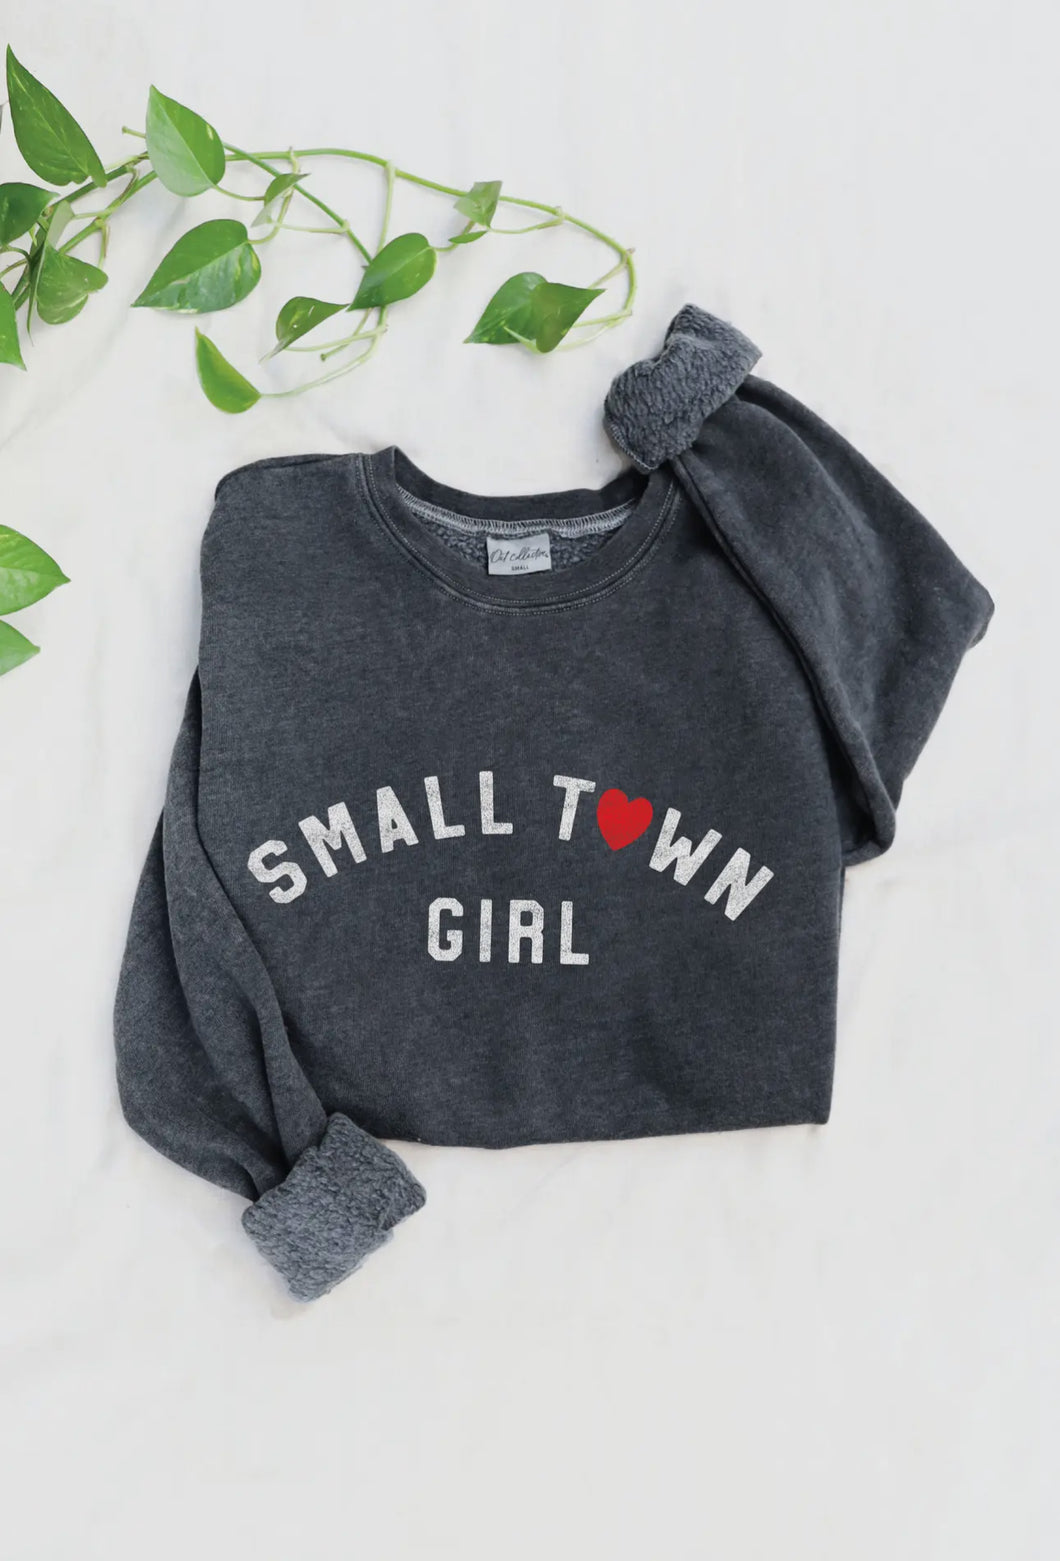 Small Town Girl—super soft collection